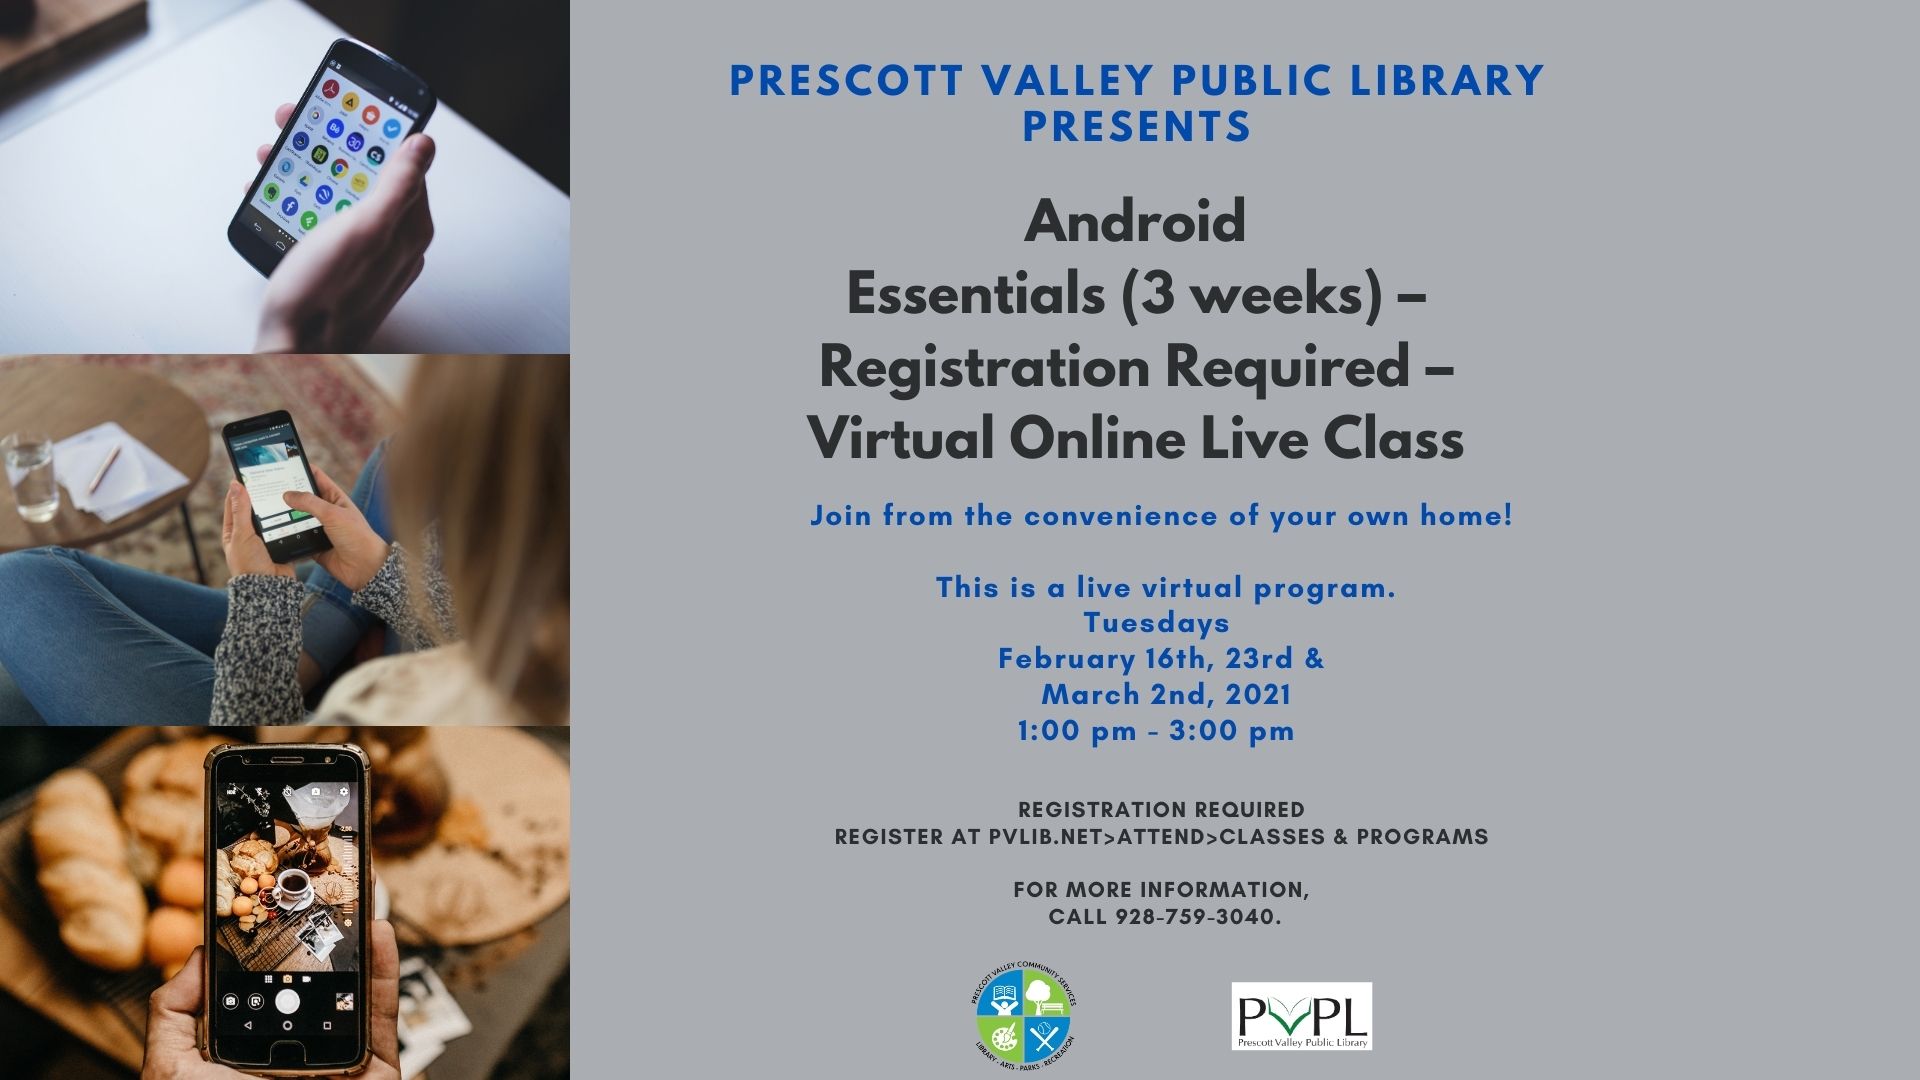 Android Essentials (3 weeks) – Registration Required – Virtual Online Live Class